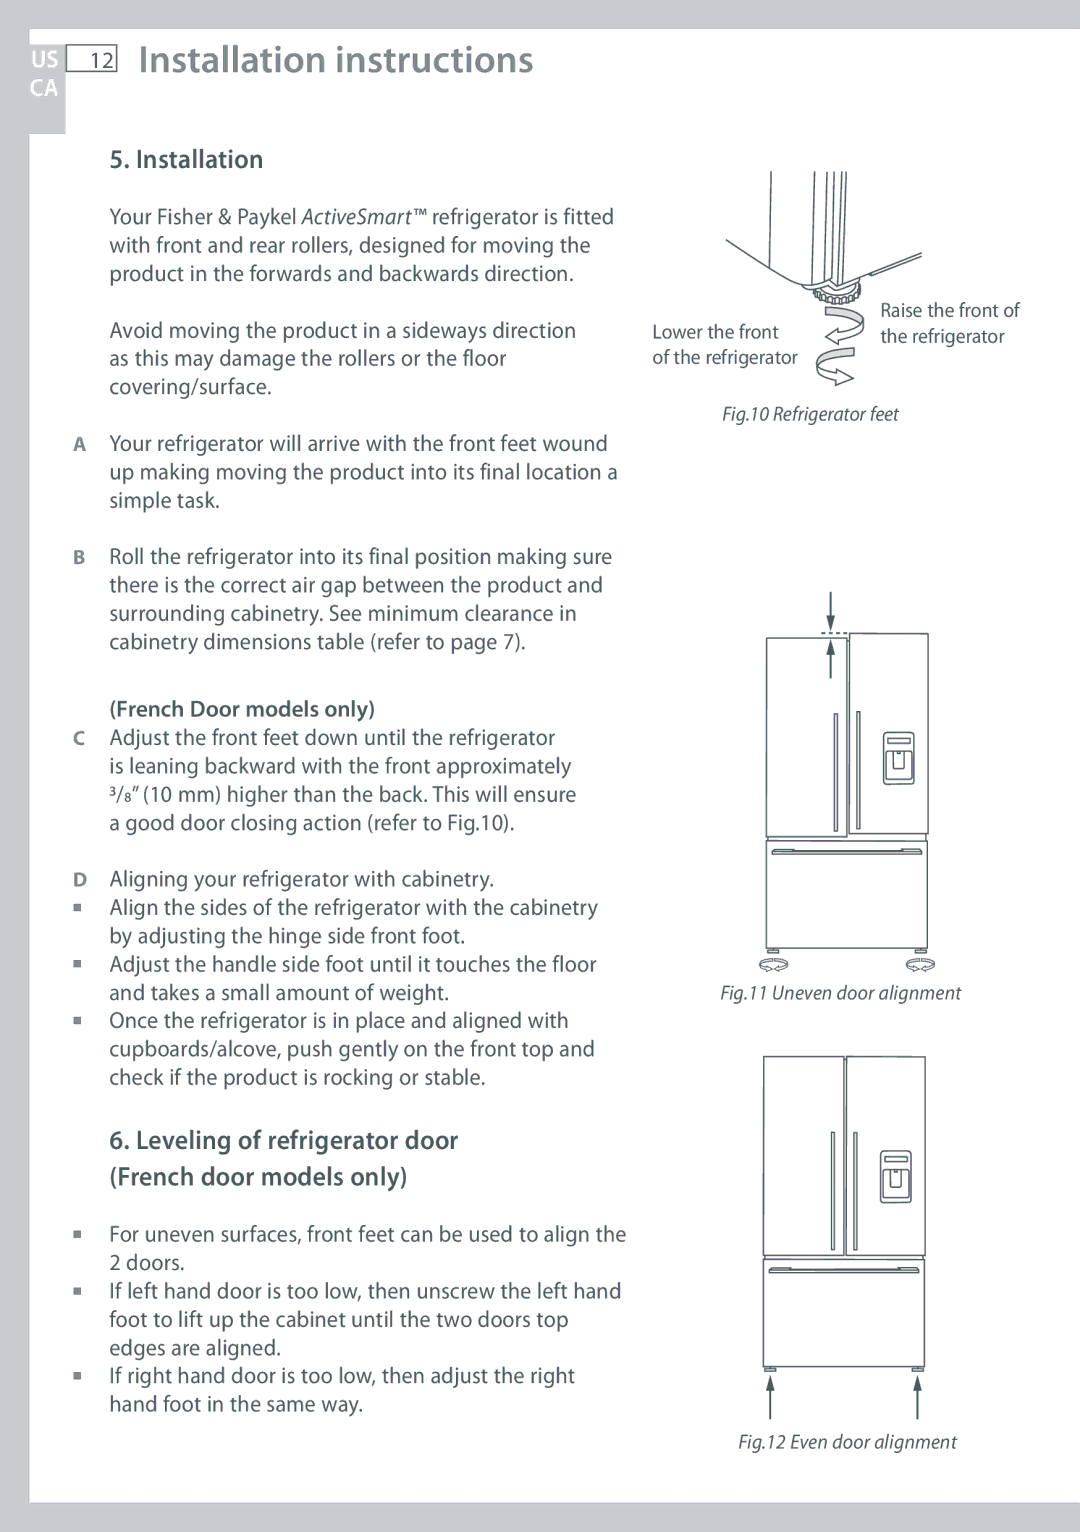 Fisher & Paykel RF170, RF135 installation instructions US 12 Installation instructions, French Door models only 